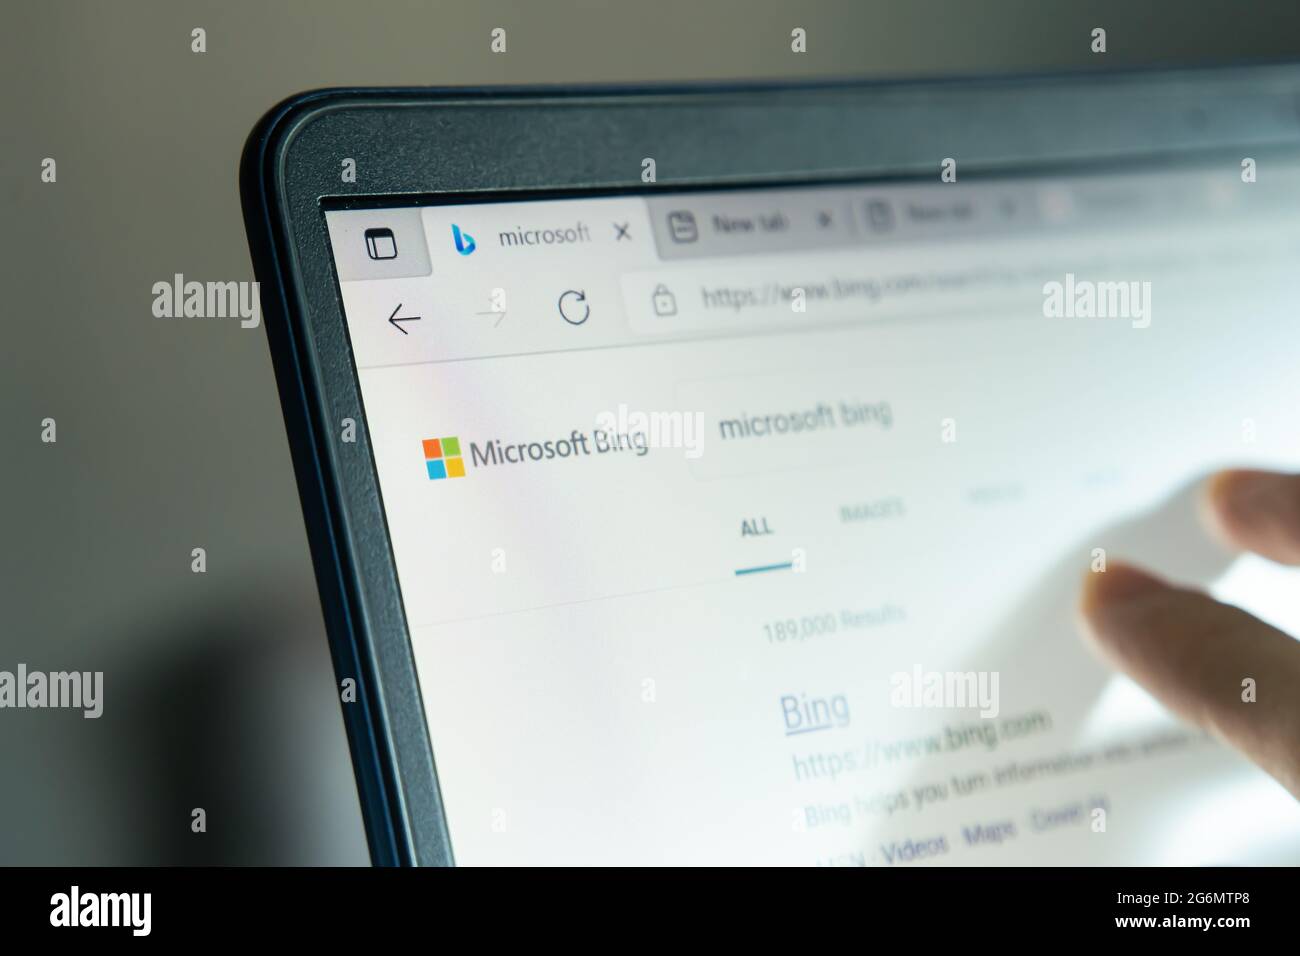 Bangkok, Thailand - June 29, 2021 : Microsoft Bing is a web search engine owned by Microsoft. Stock Photo